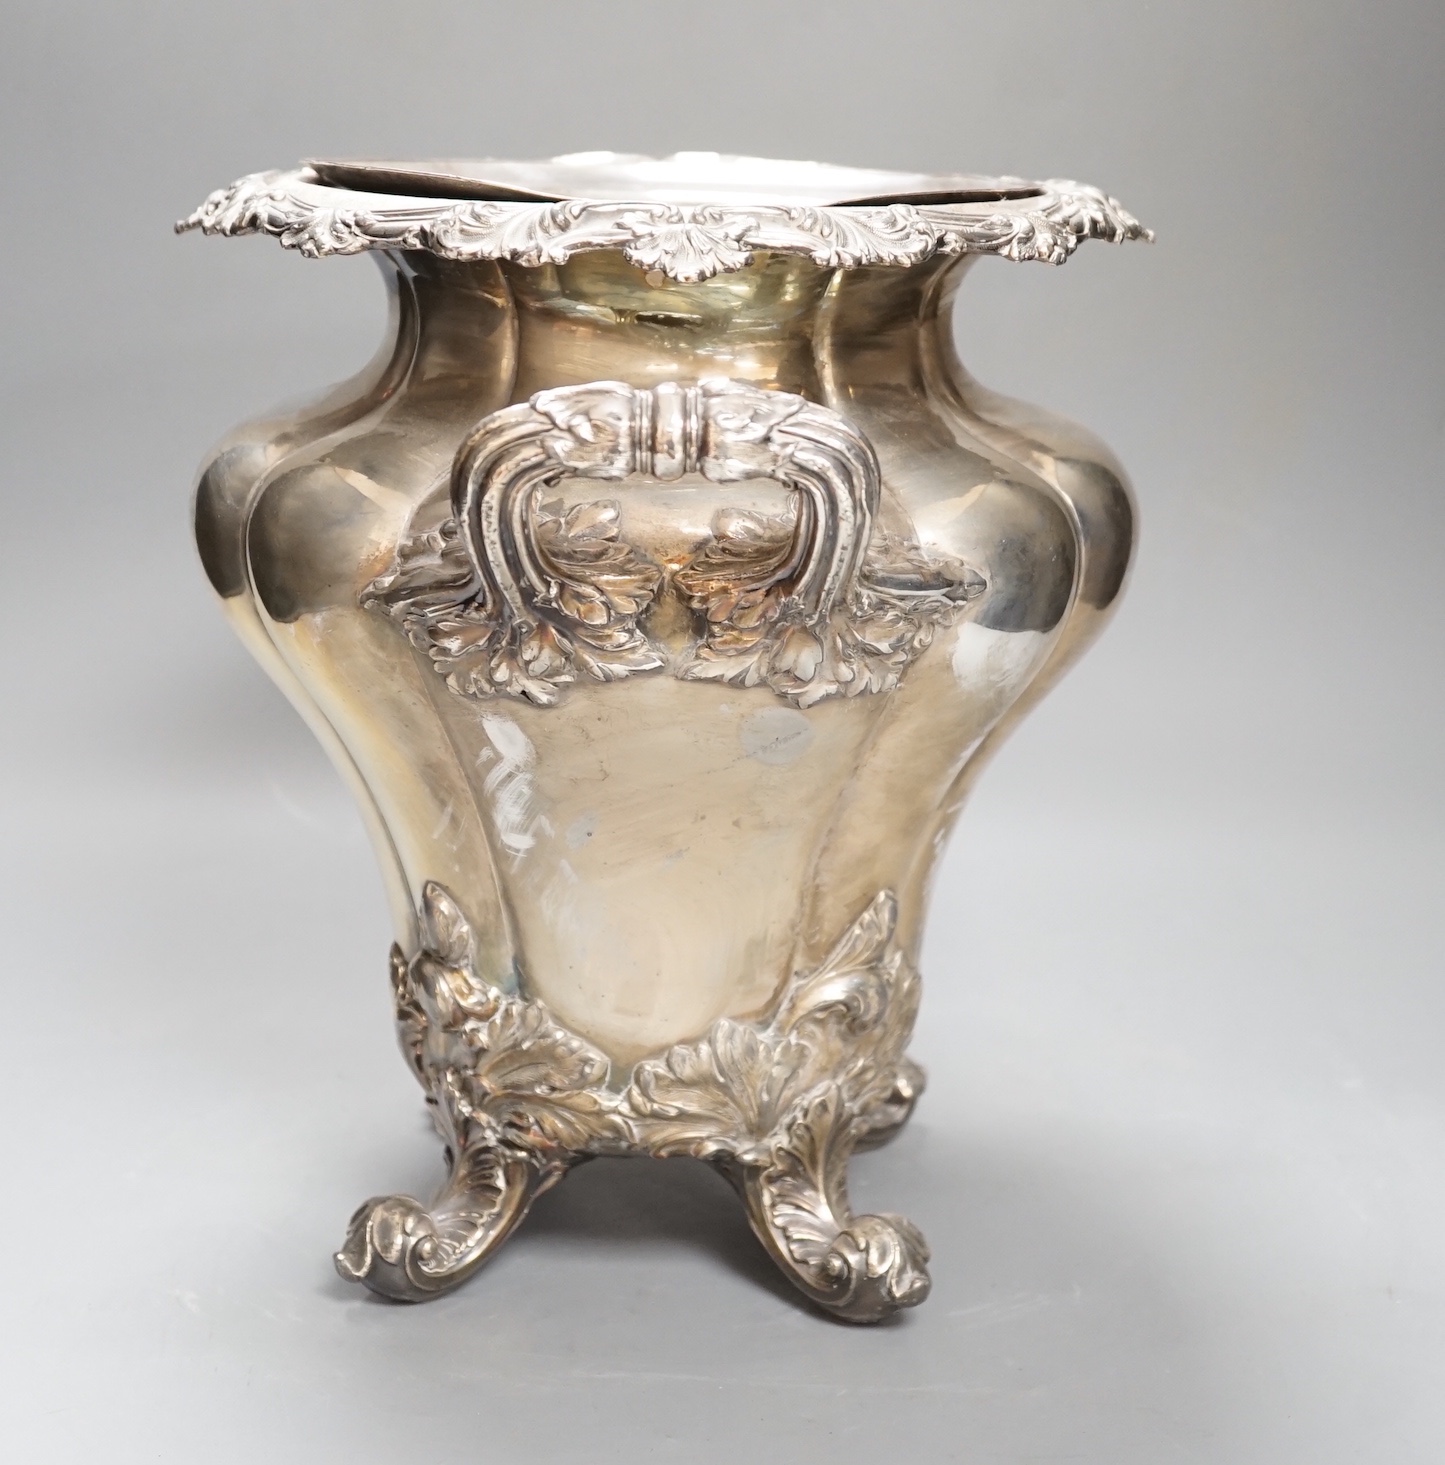 A William IV Old Sheffield plate twin handled wine cooler, with liner, acanthus scrolled borders, on four scrolled feet Height 28cm